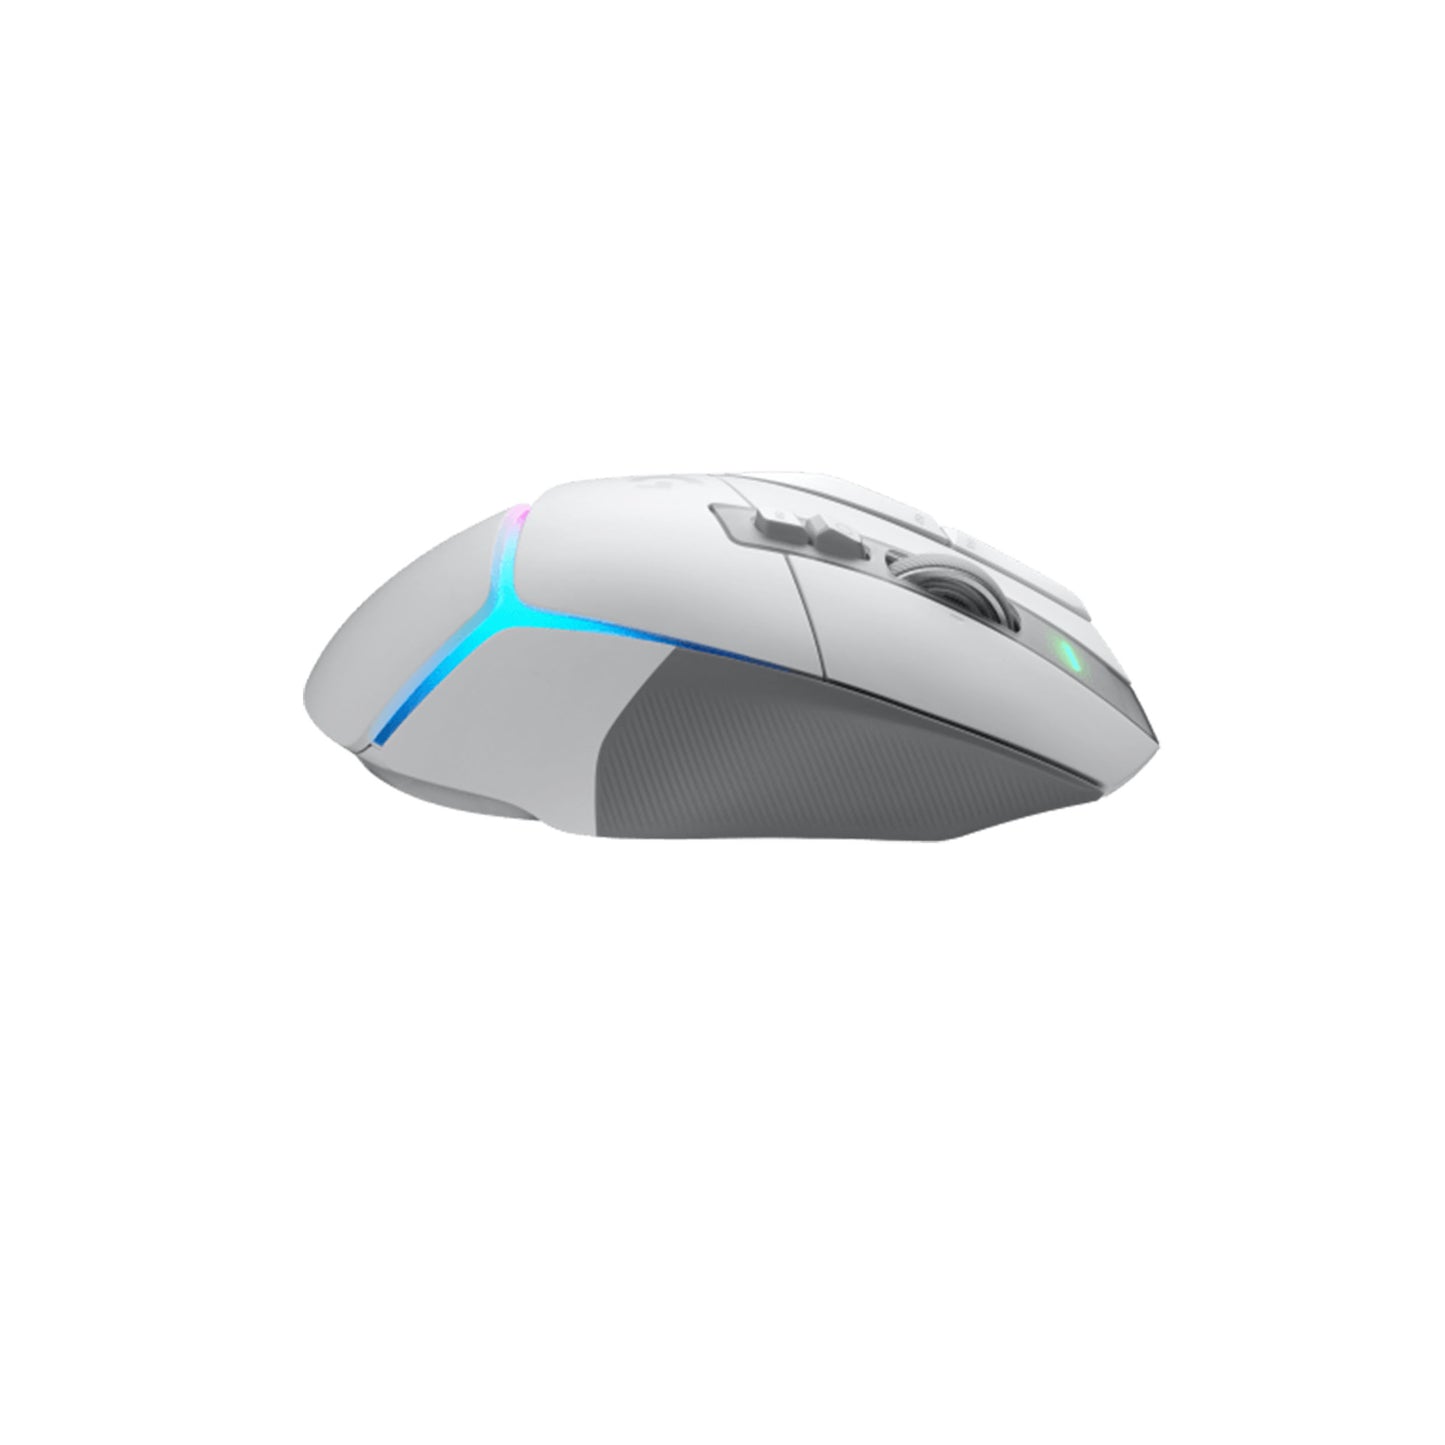 G502 X PLUS GAMING MOUSE